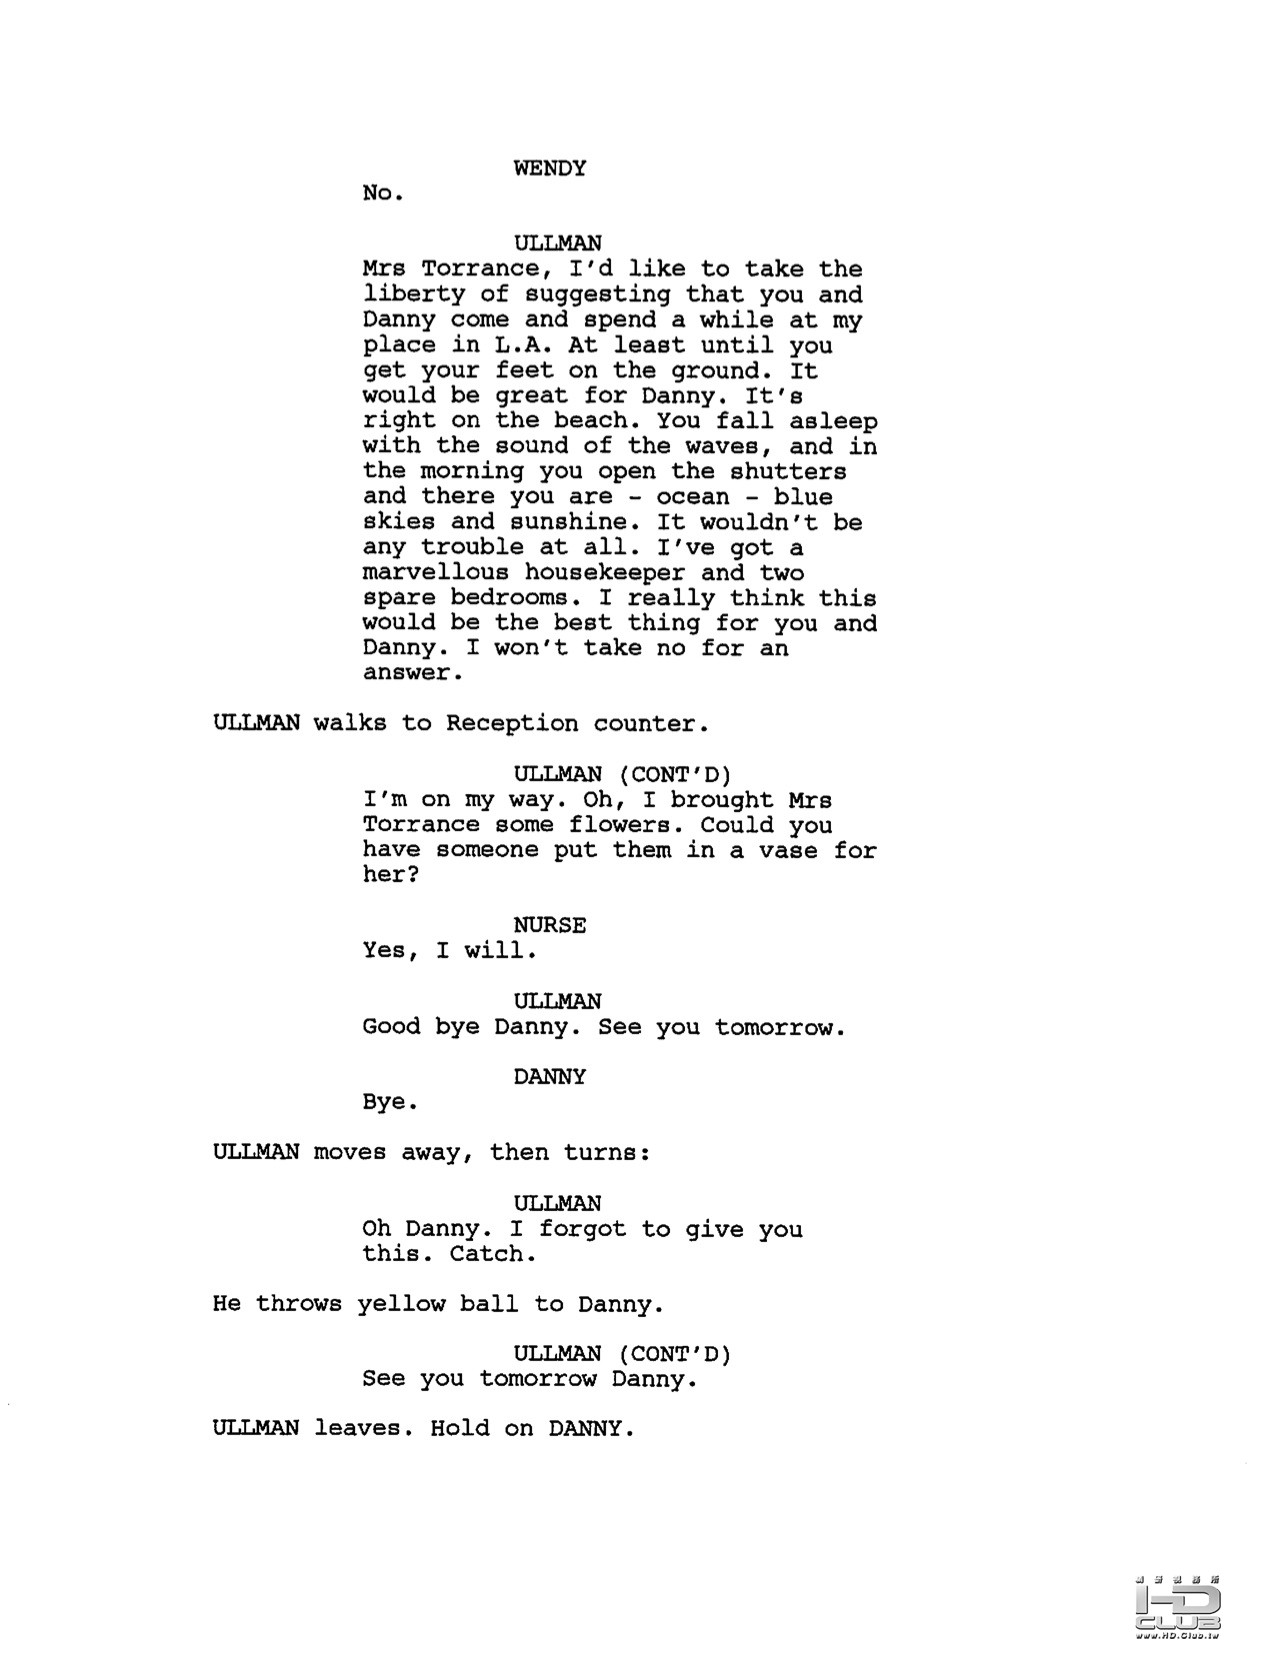 screenplay-for-the-deleted-original-ending-of-the-2.jpeg